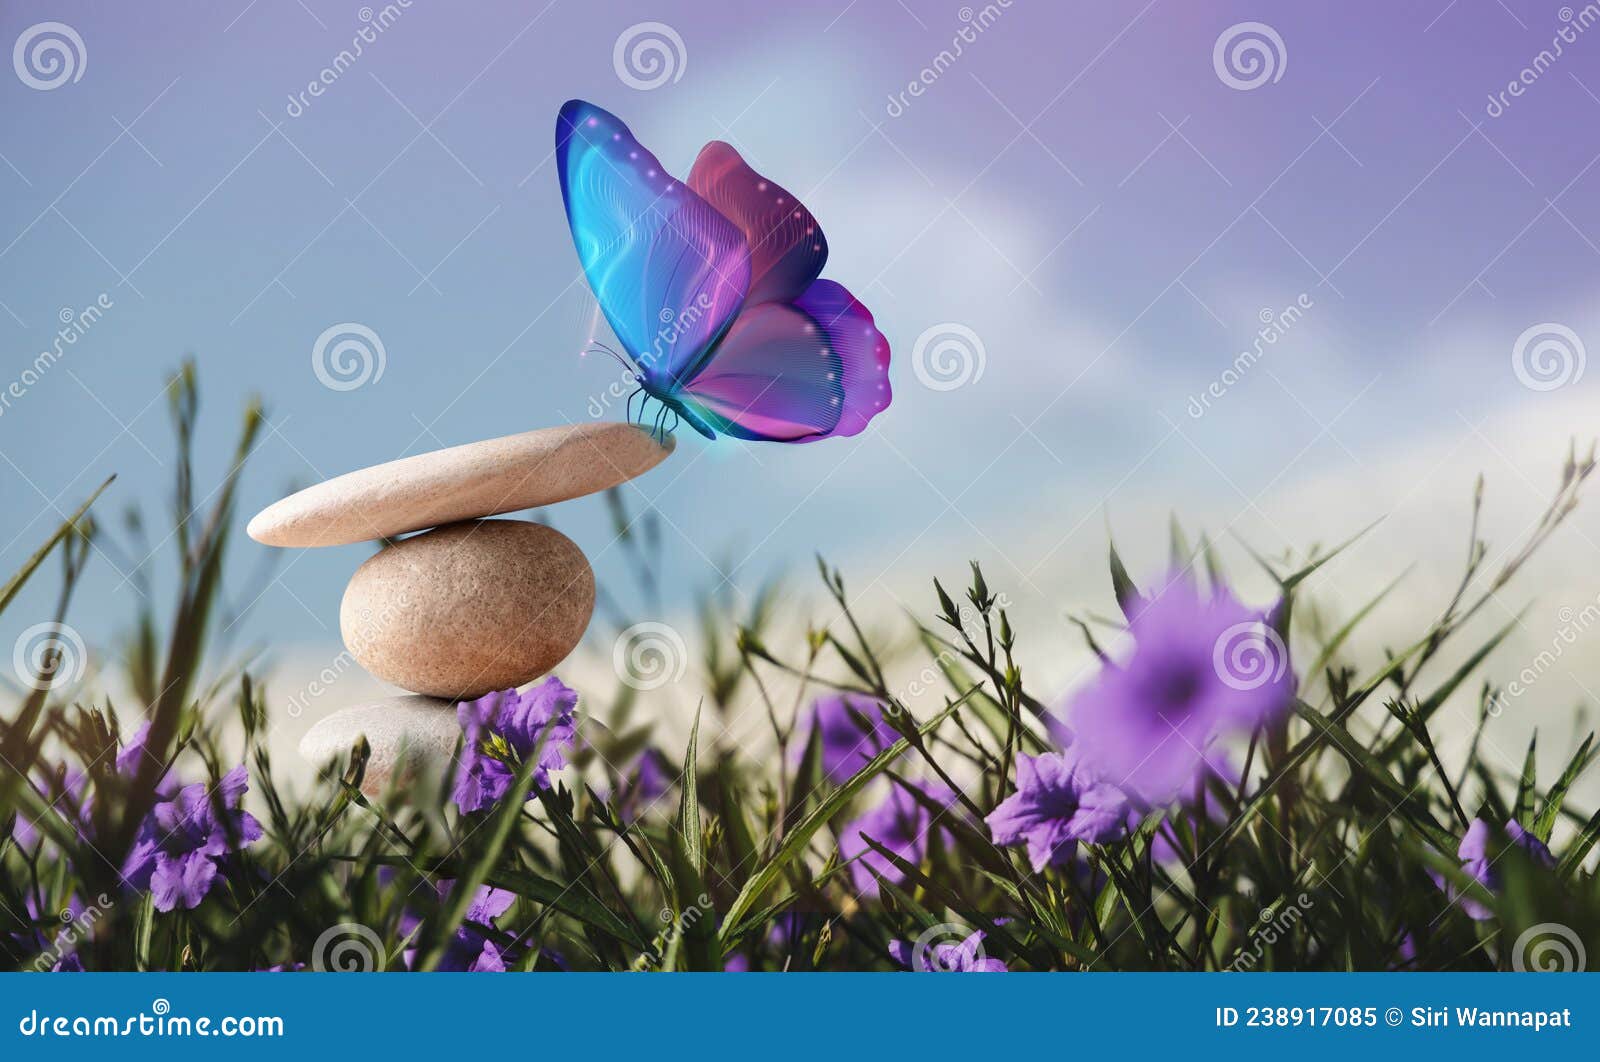 harmony of life concept. surrealist butterfly on the pebble stone stack in garden. metaphor of balancing nature and technology.